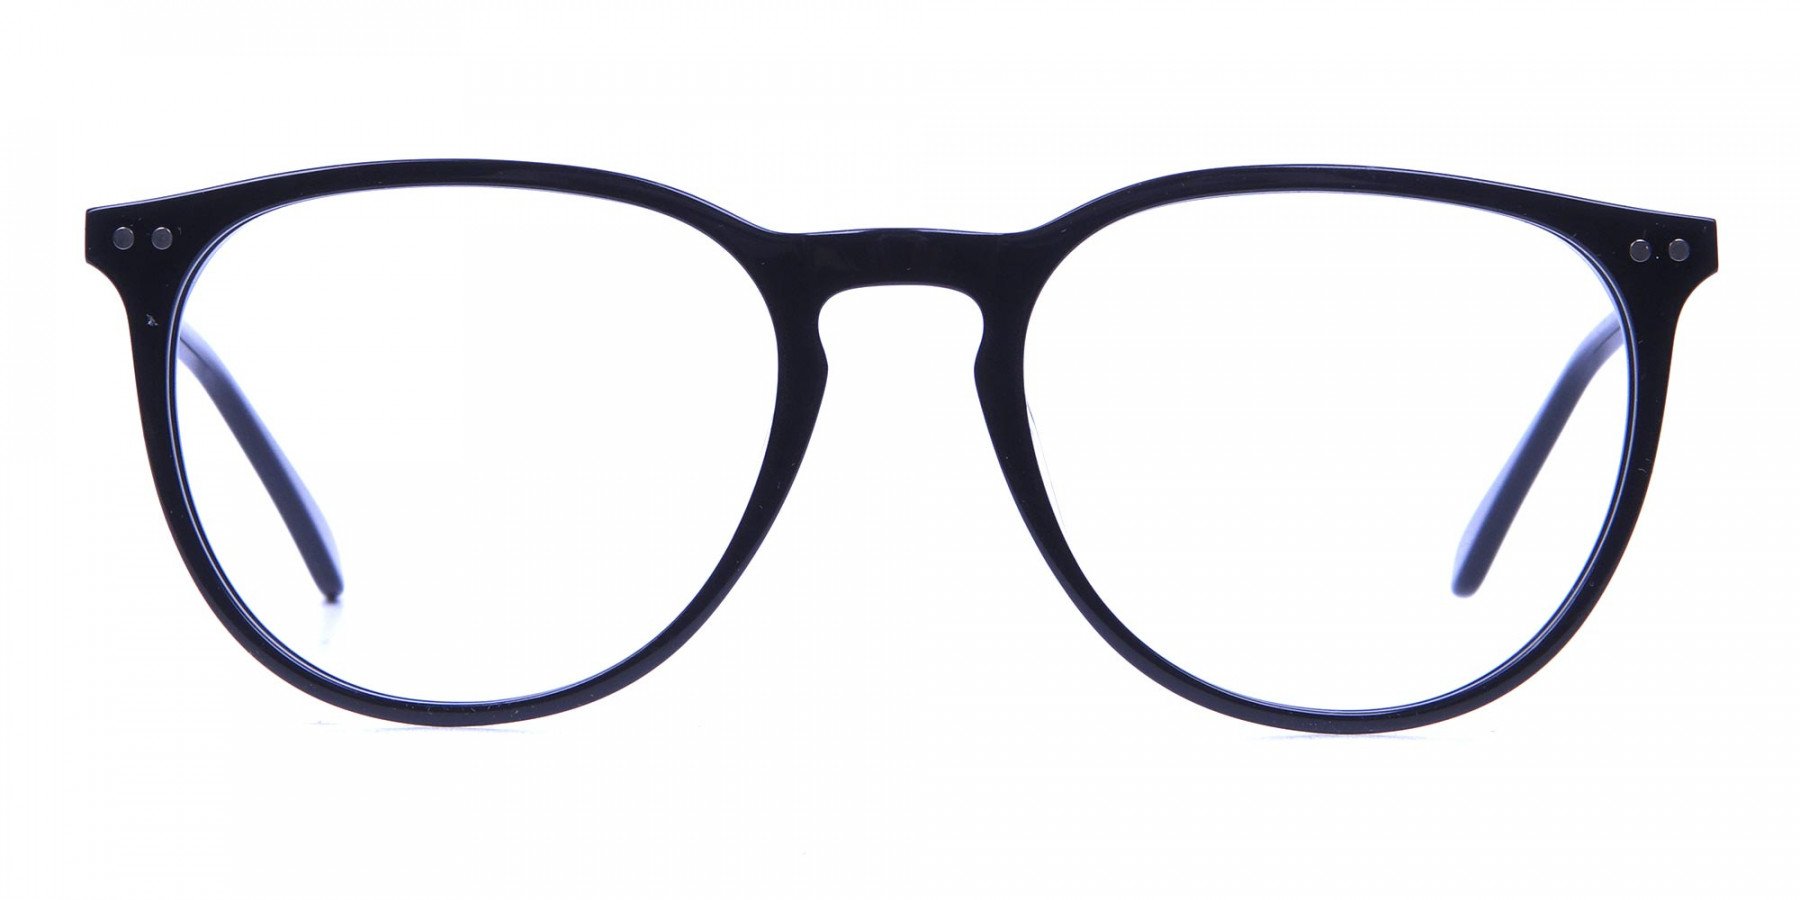 Glossy Black Round Glasses with Slim Arms